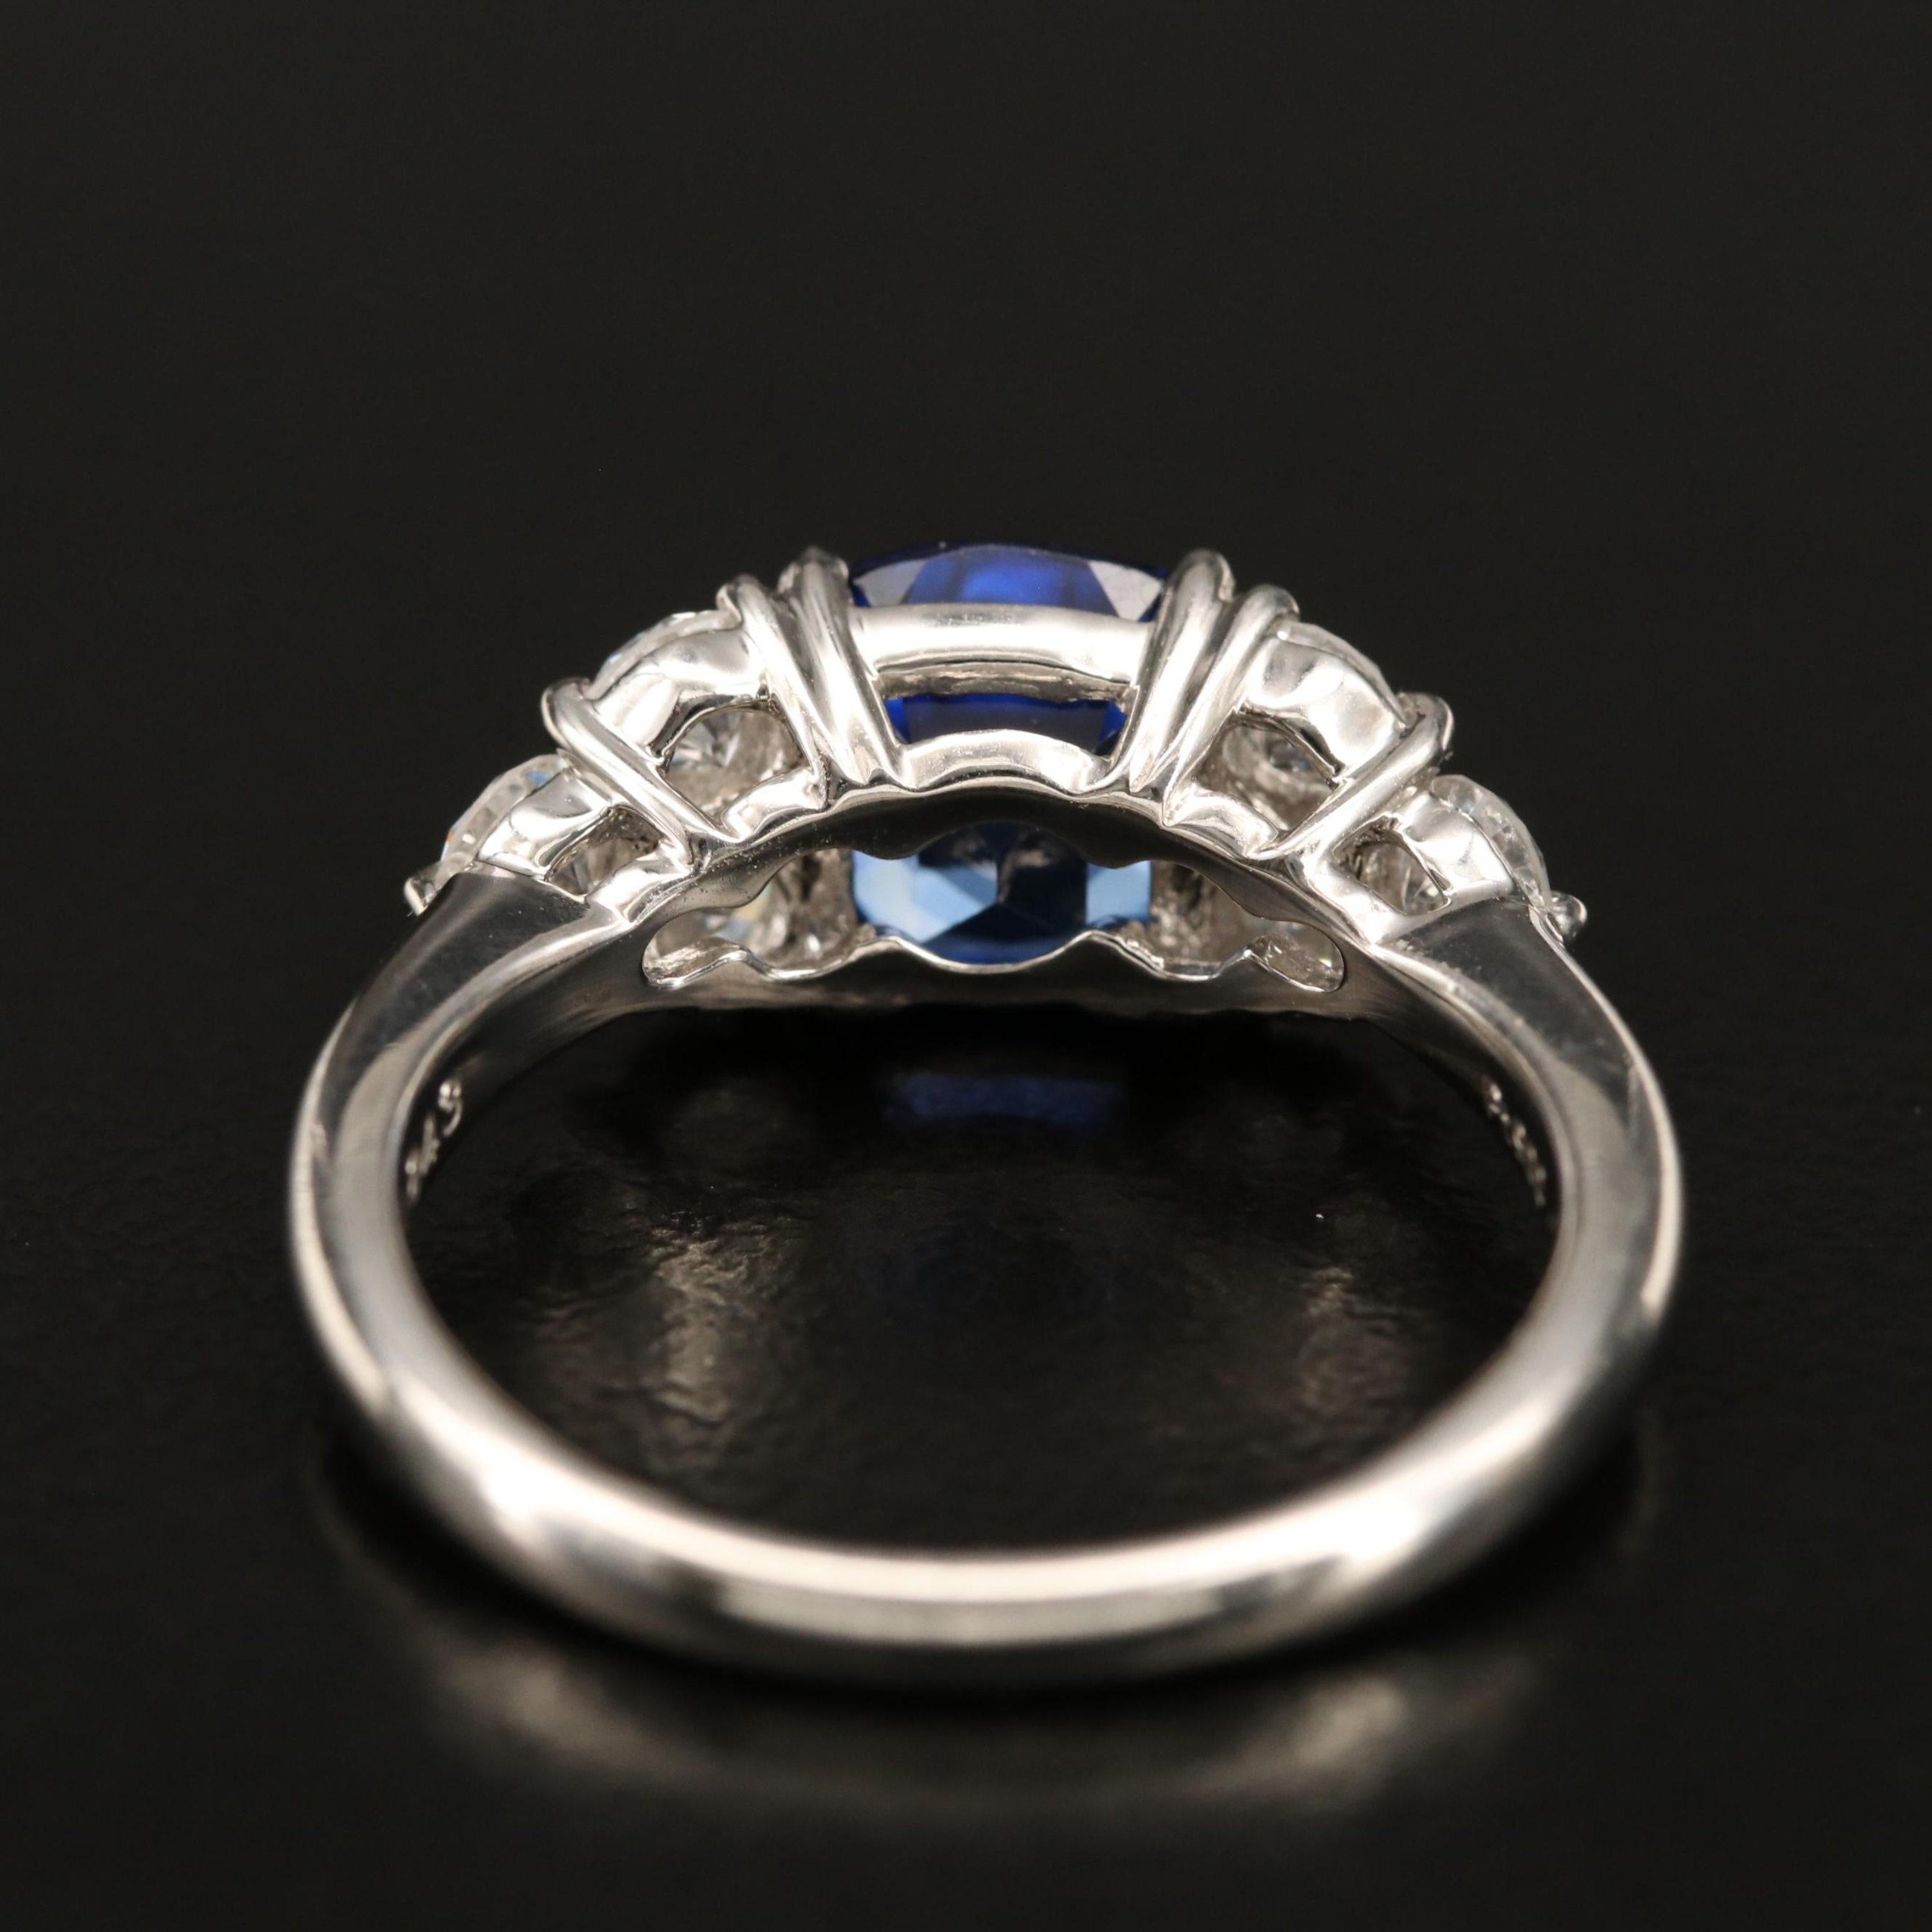 For Sale:  2.67 Carat Sapphire and Diamond White Gold Engagement Ring Bridal Statement Ring 2